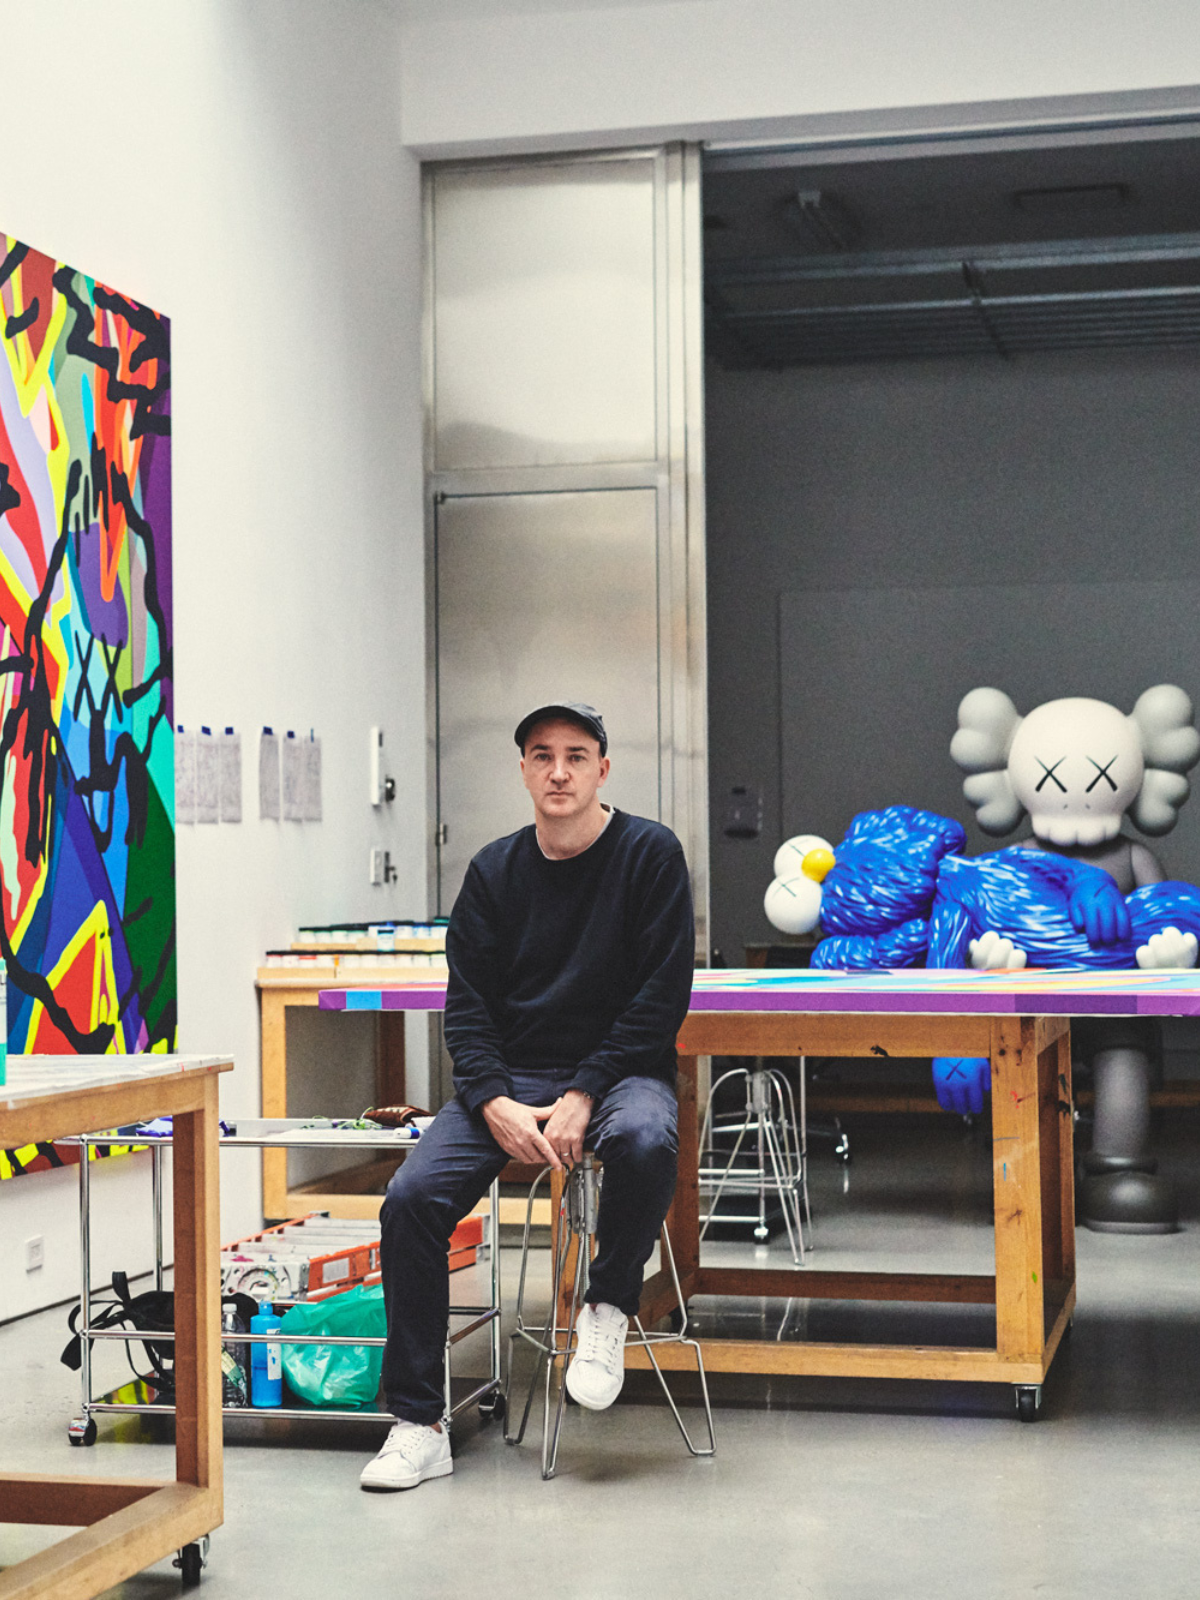  KAWS artist in his studio with paintings and sculpture